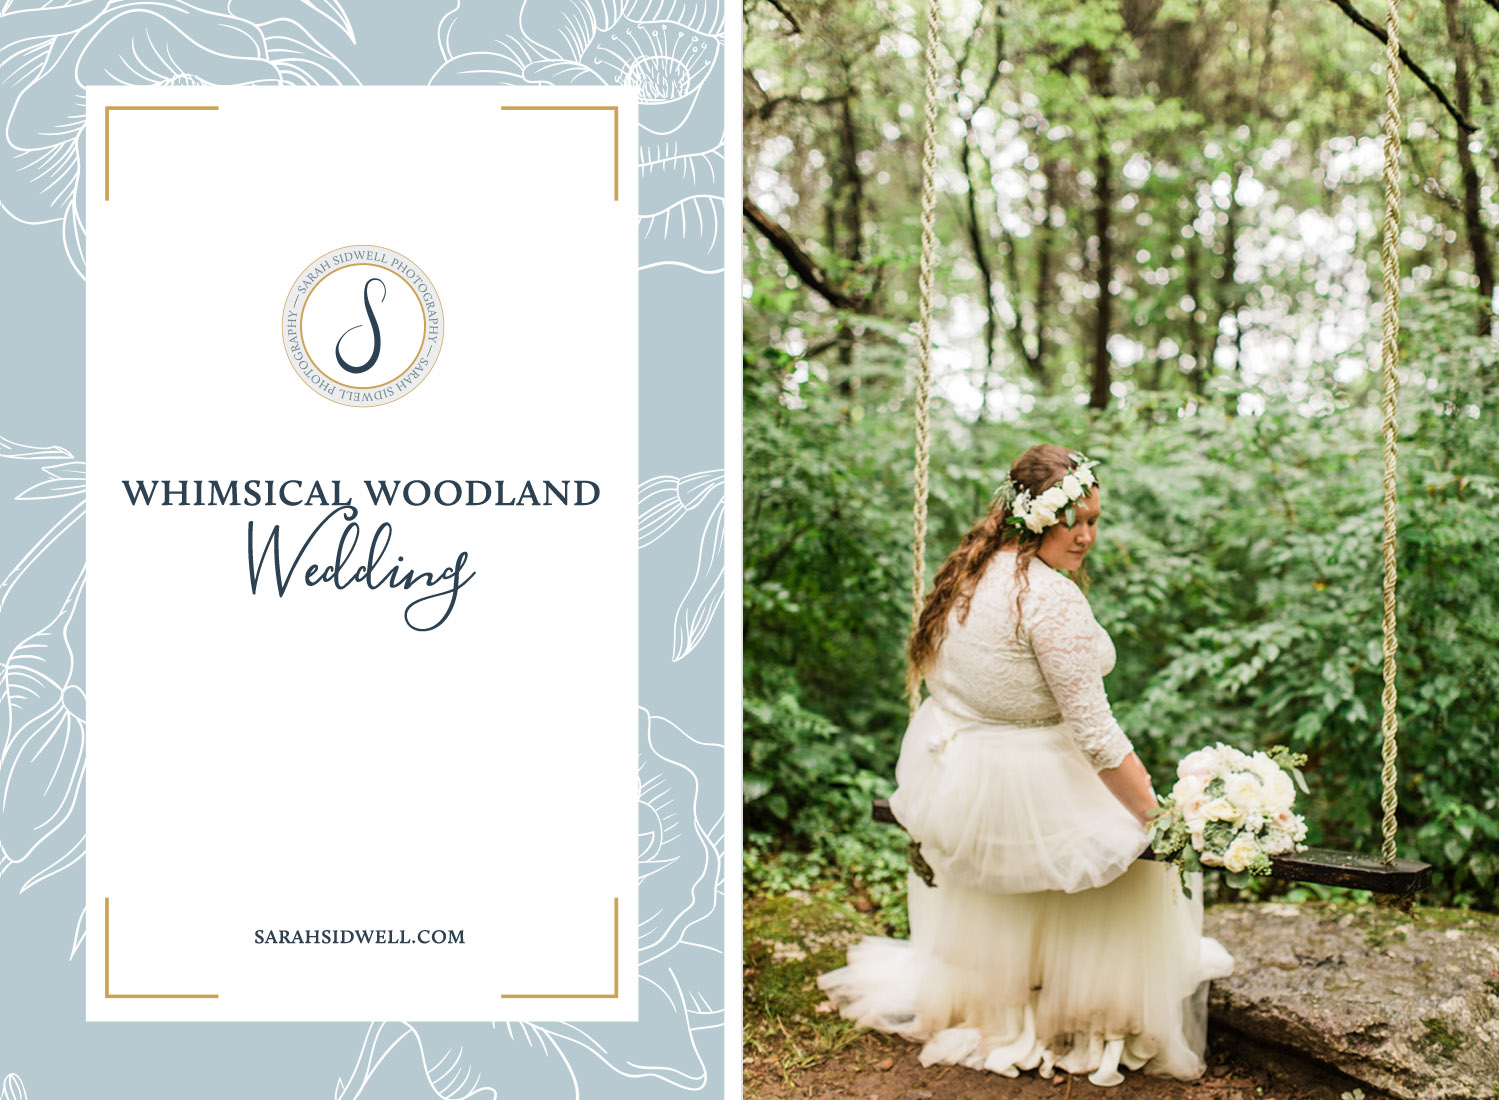 This Whimsical Woodland Wedding in Nashville Tennessee will inspire all your fairytale wooded wedding dreams.jpg